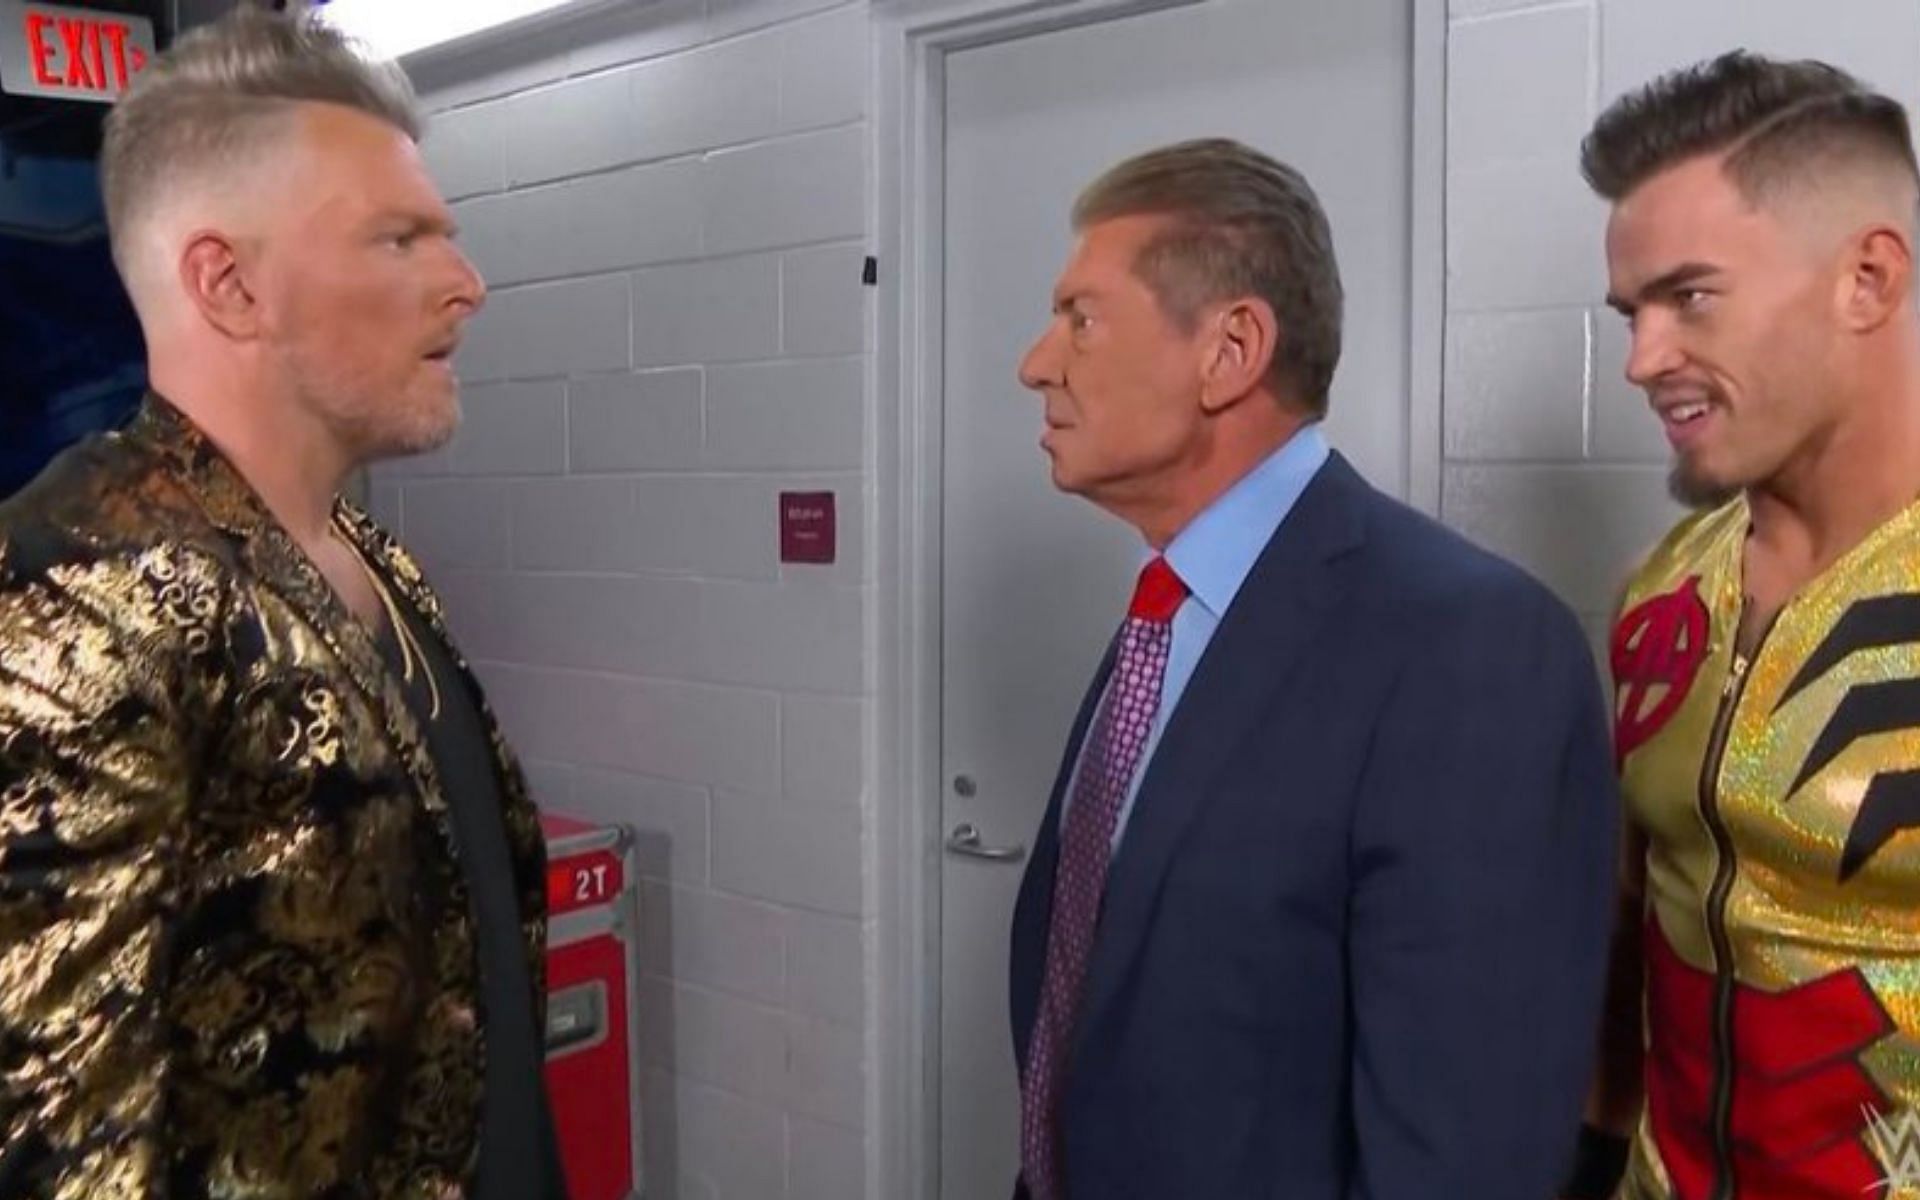 Vince McMahon was furious with Pat McAfee